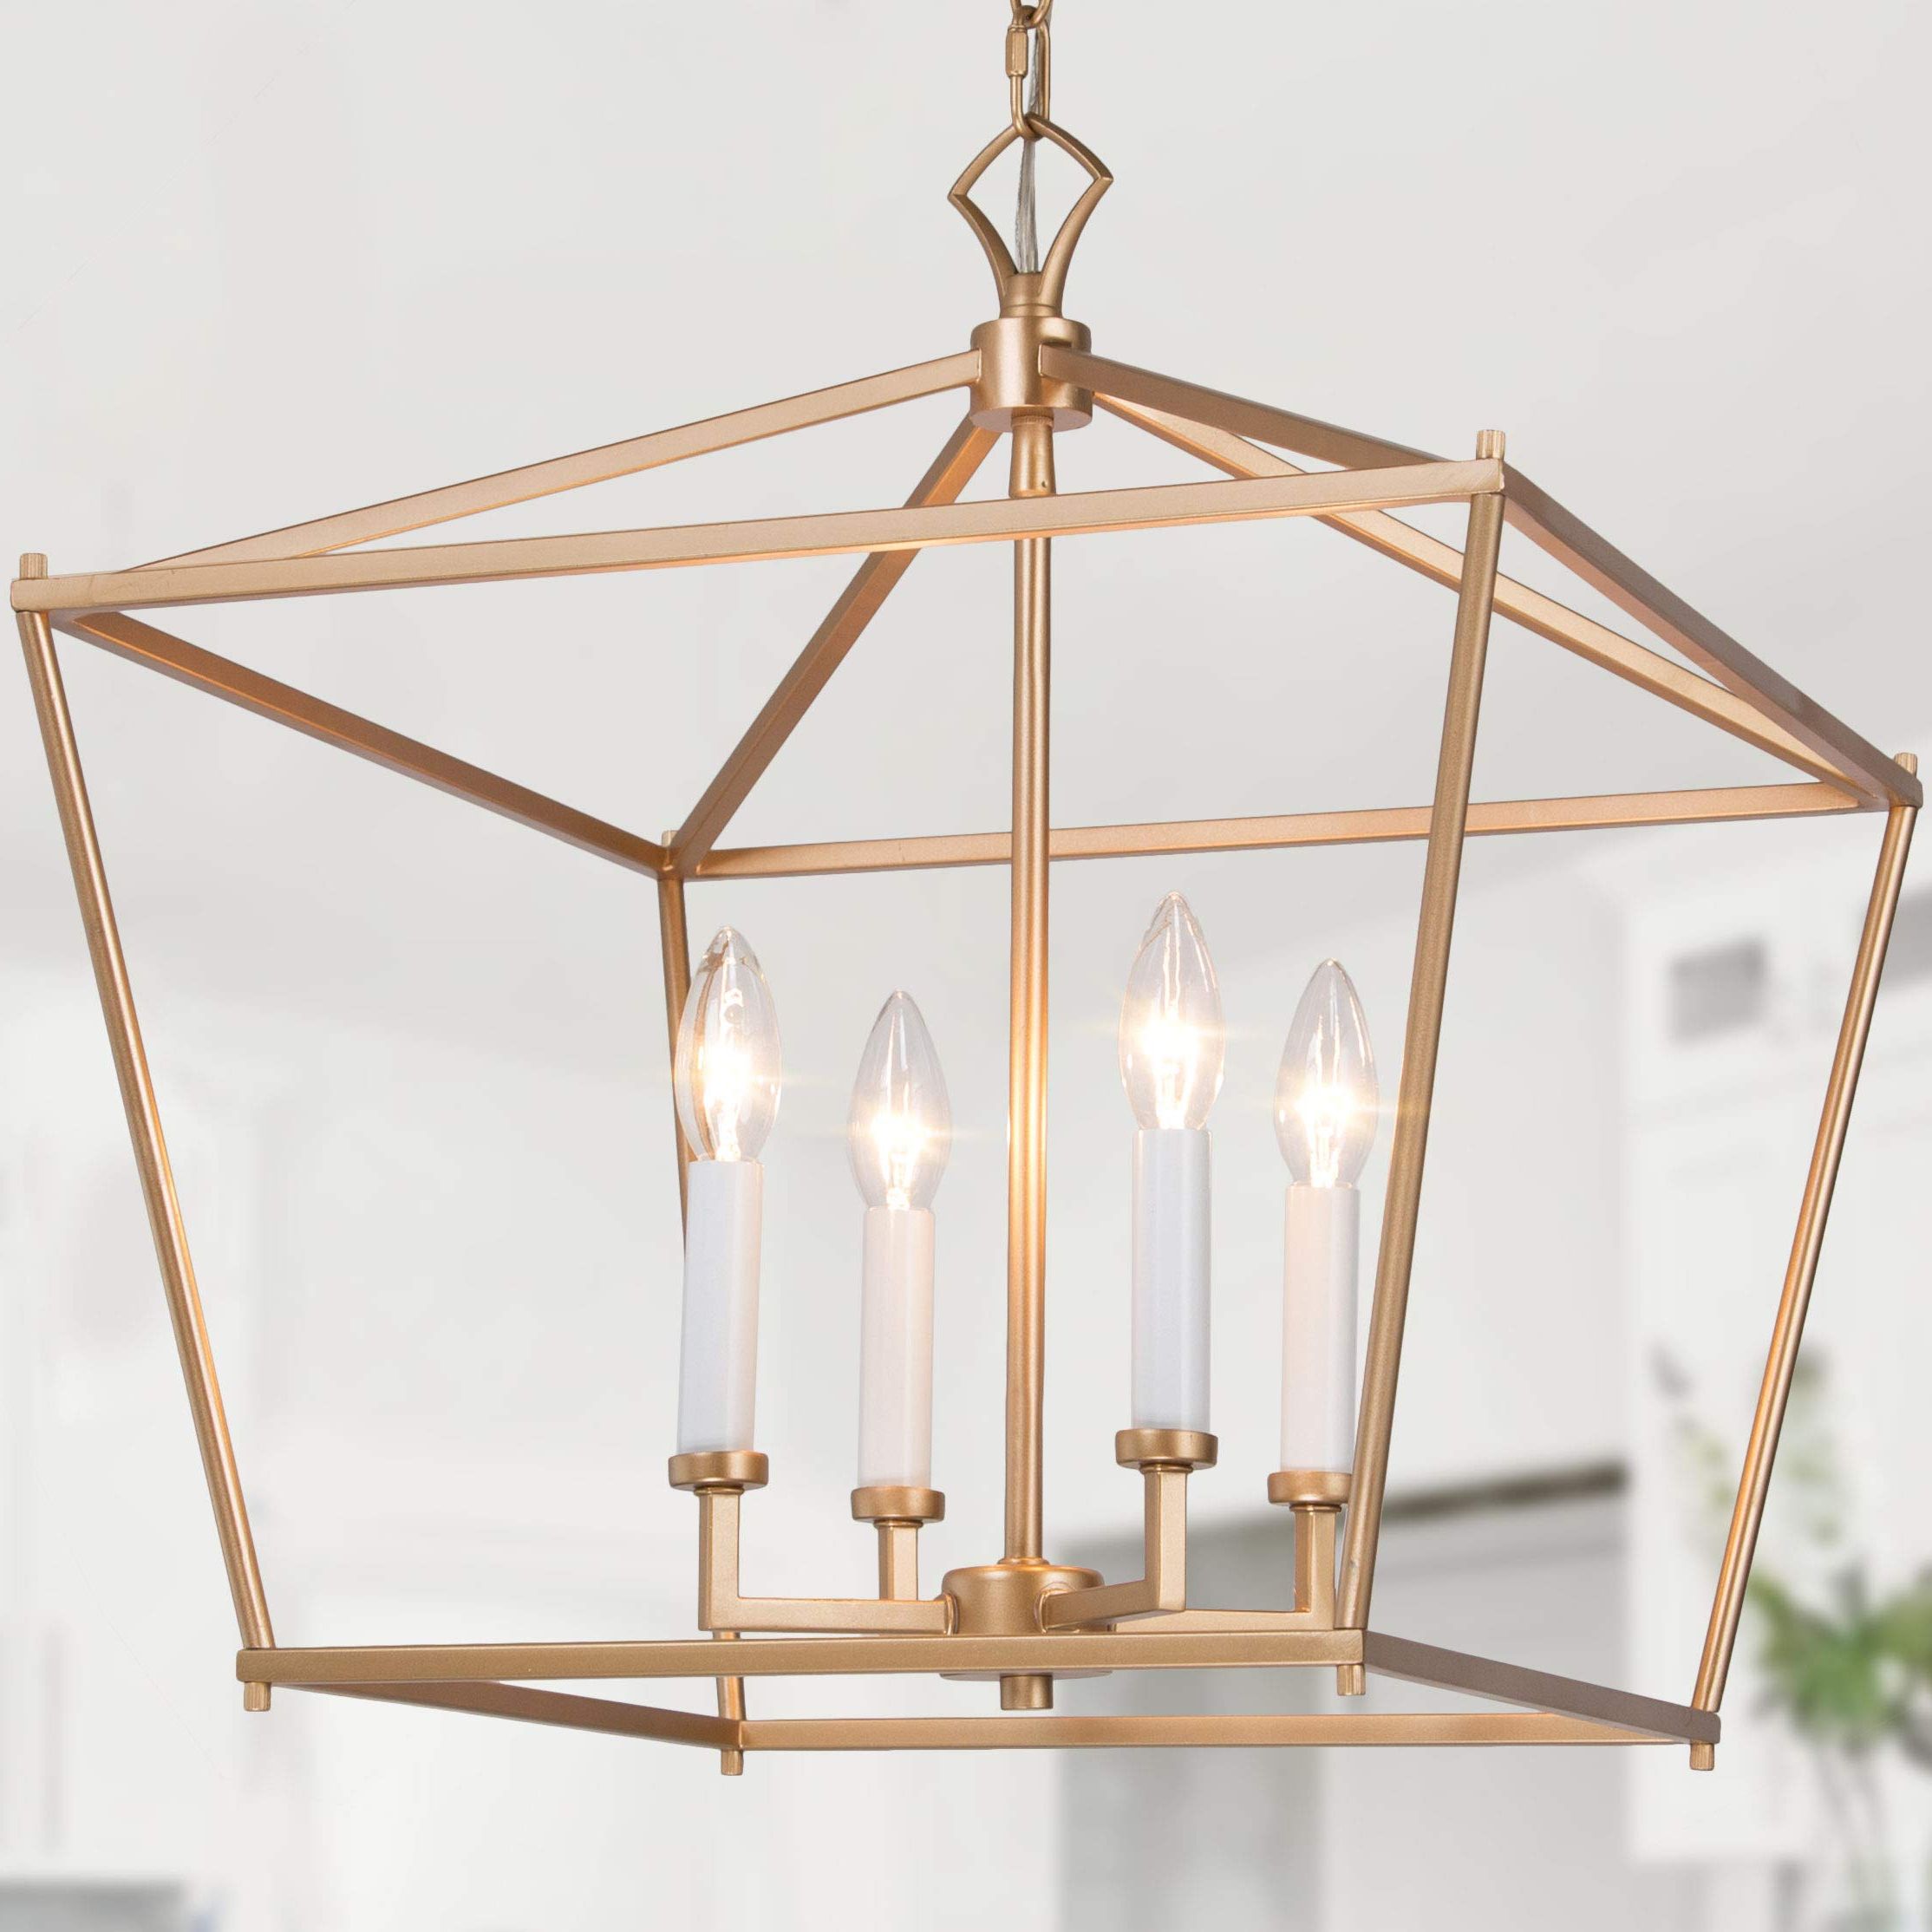 Most Popular White Gold Lantern Chandeliers Inside Gold Chandelier, Lantern Pendant Light Fixtures, Foyer Chandelier For  Dining Room, Kitchen Island, Entryway, 17.5'' L X  (View 6 of 10)